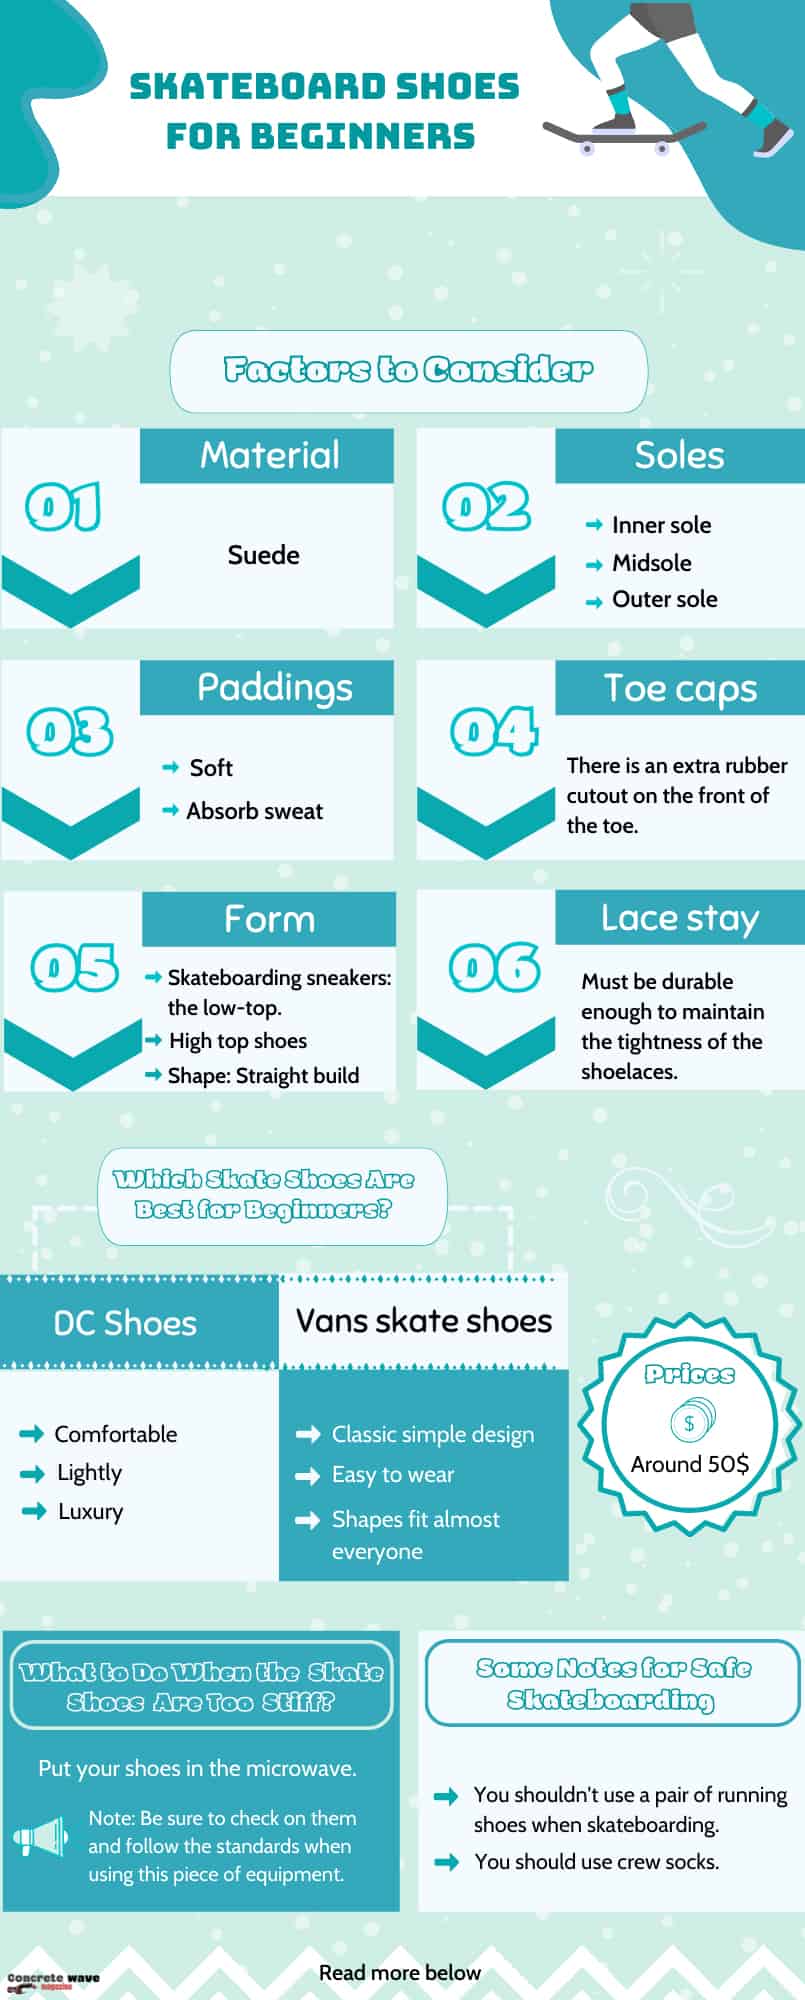 skating-shoes-for-beginners